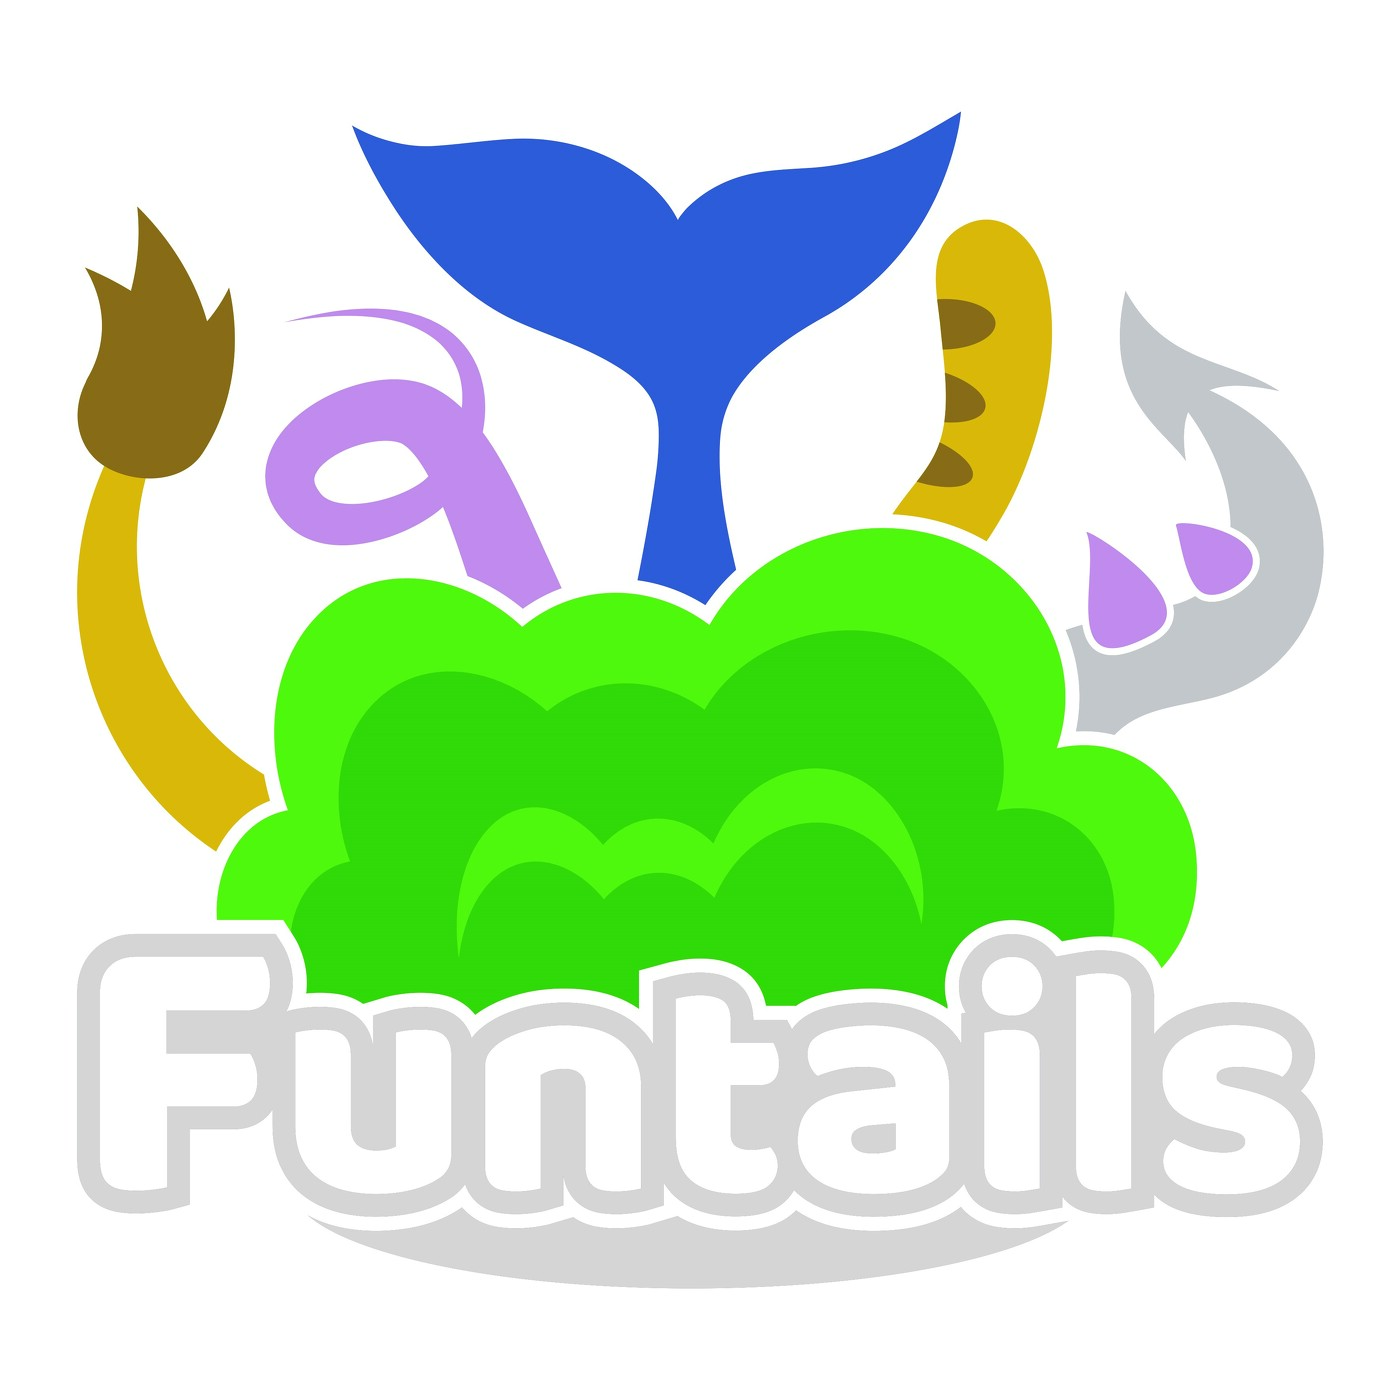 Funtails